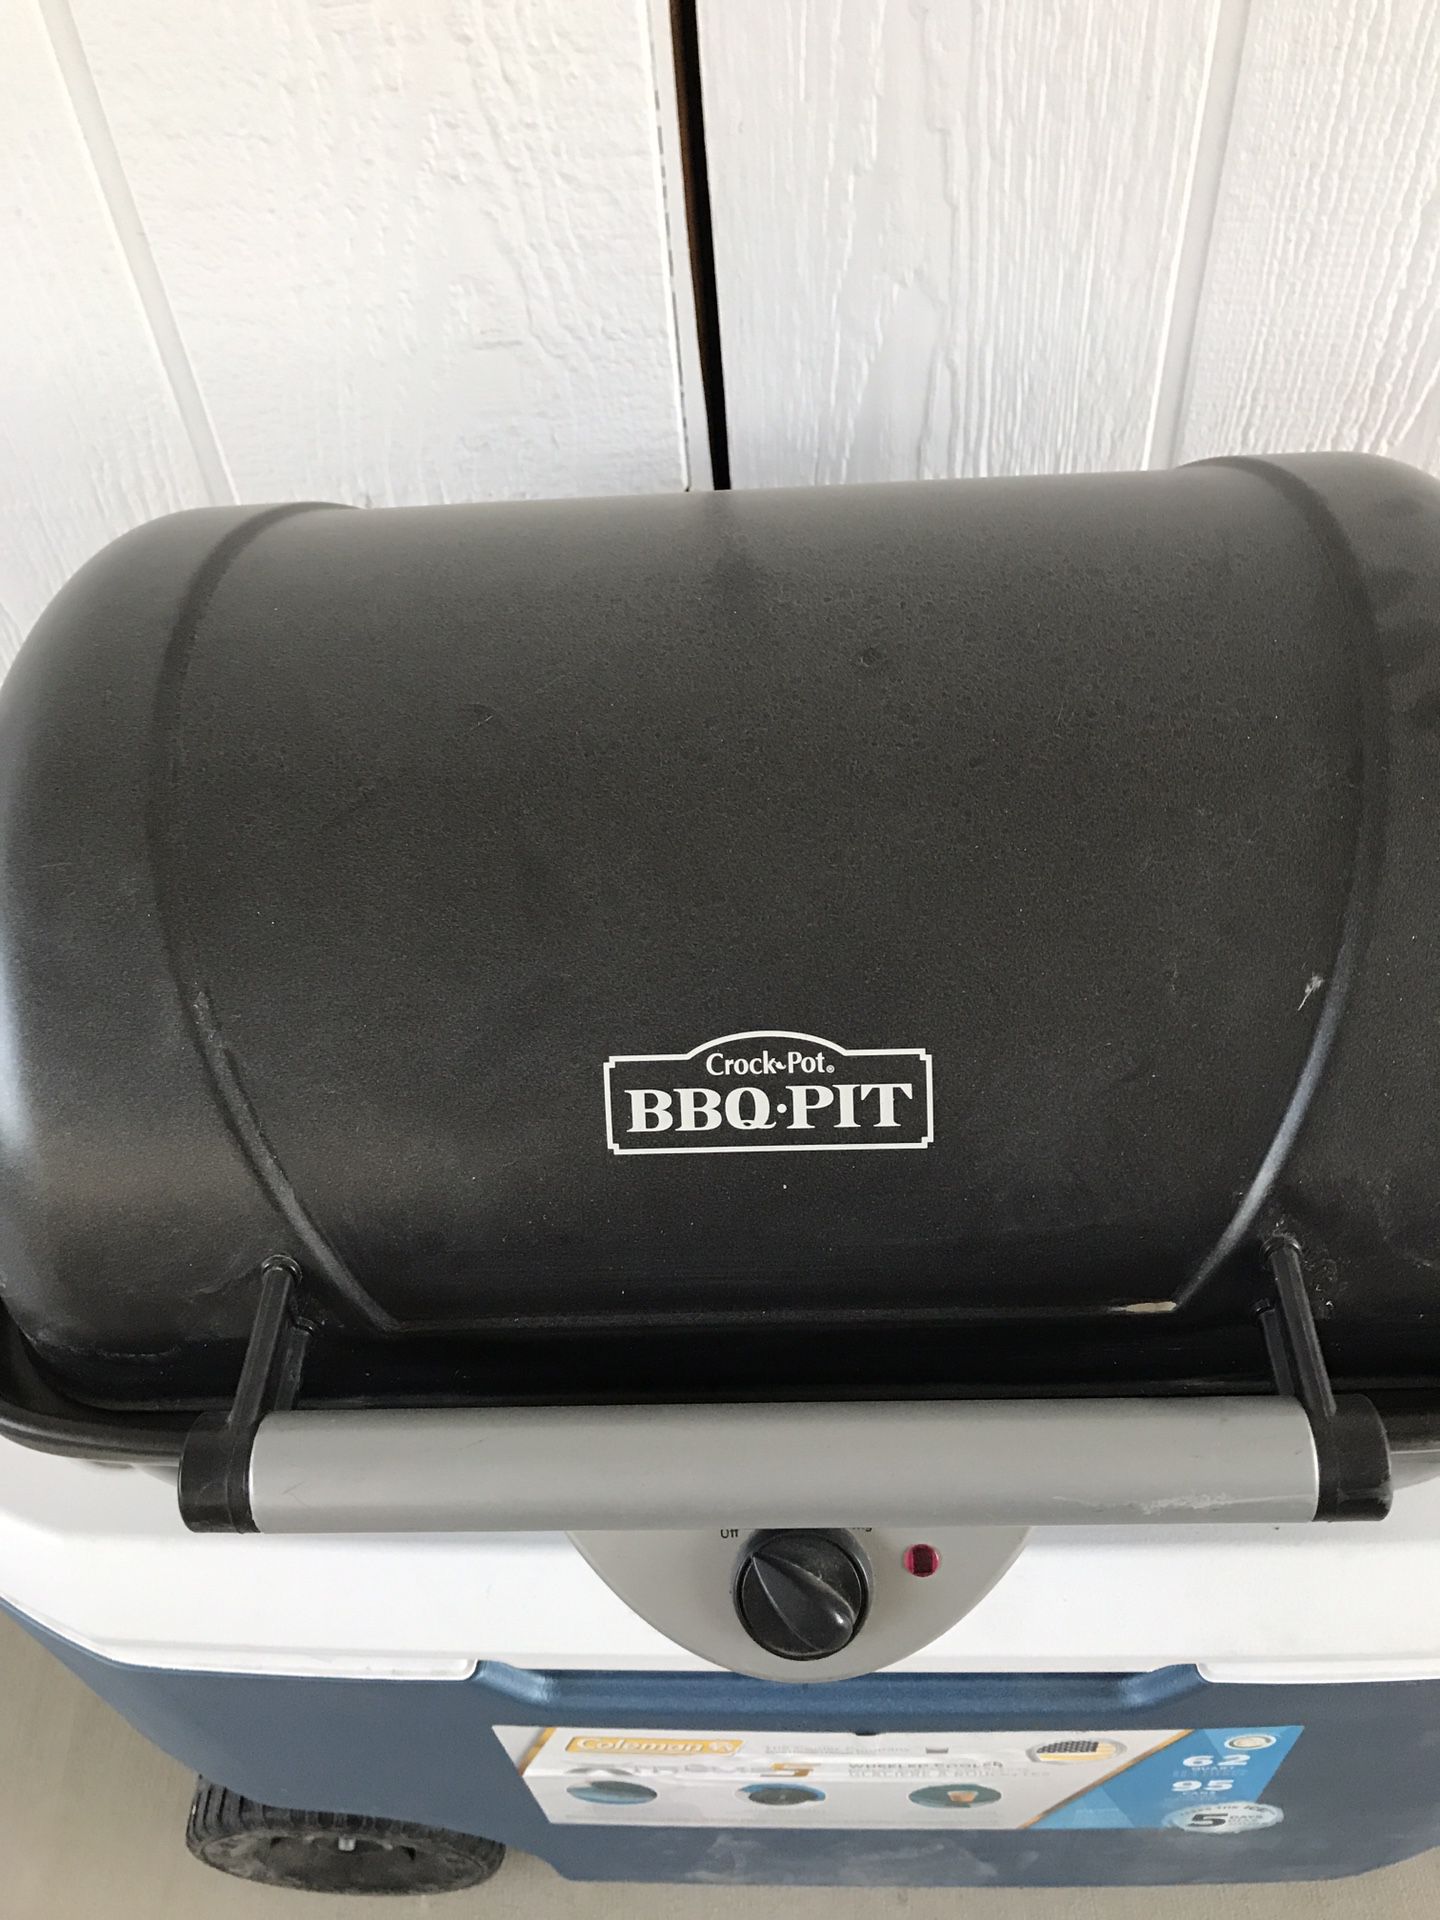 Electric Crock Pot Barbecue Pit, good condition